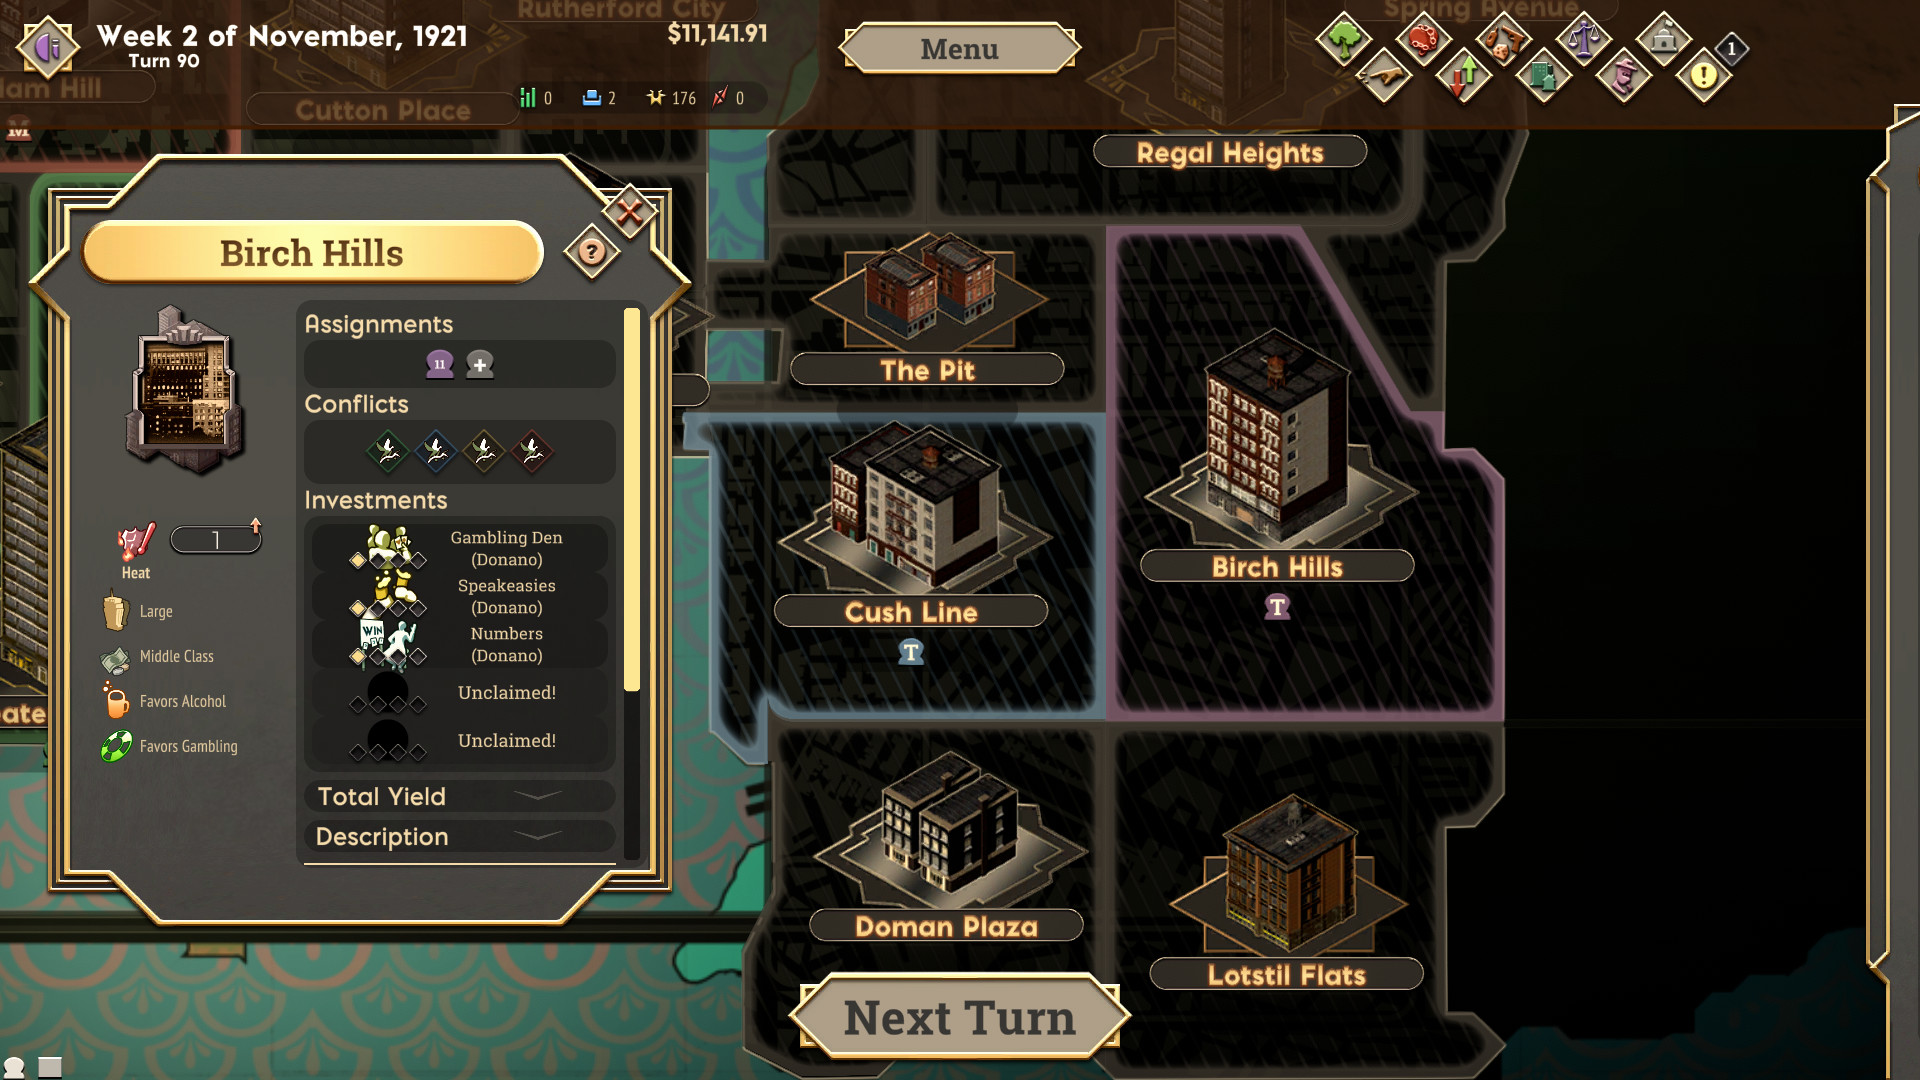 The Commission 1920: Organized Crime Grand Strategy screenshot